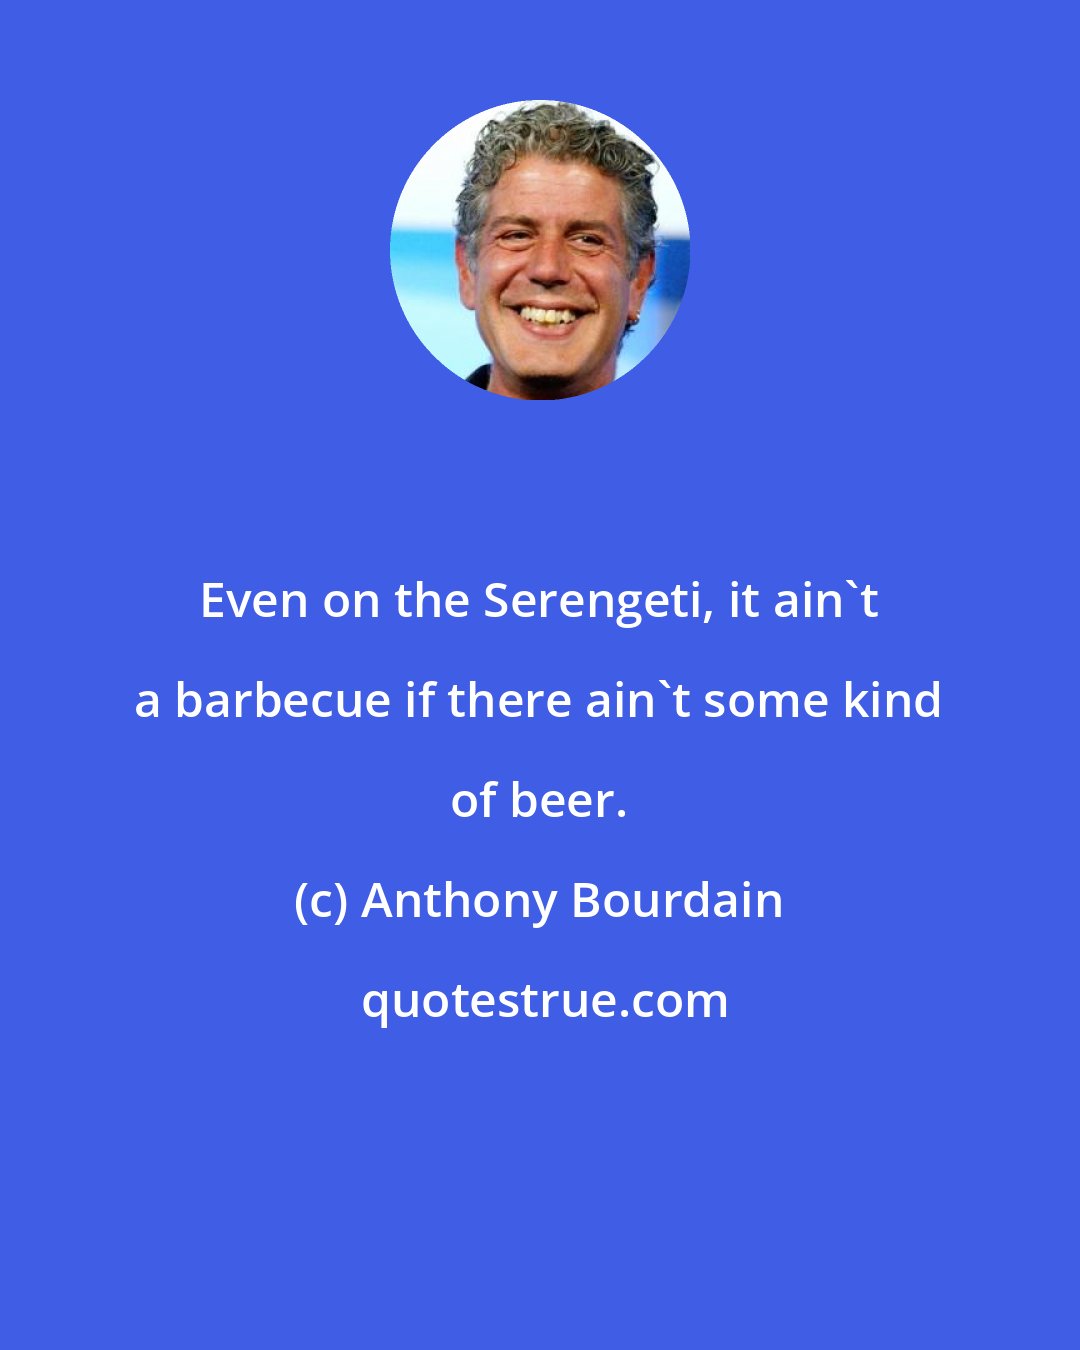 Anthony Bourdain: Even on the Serengeti, it ain't a barbecue if there ain't some kind of beer.